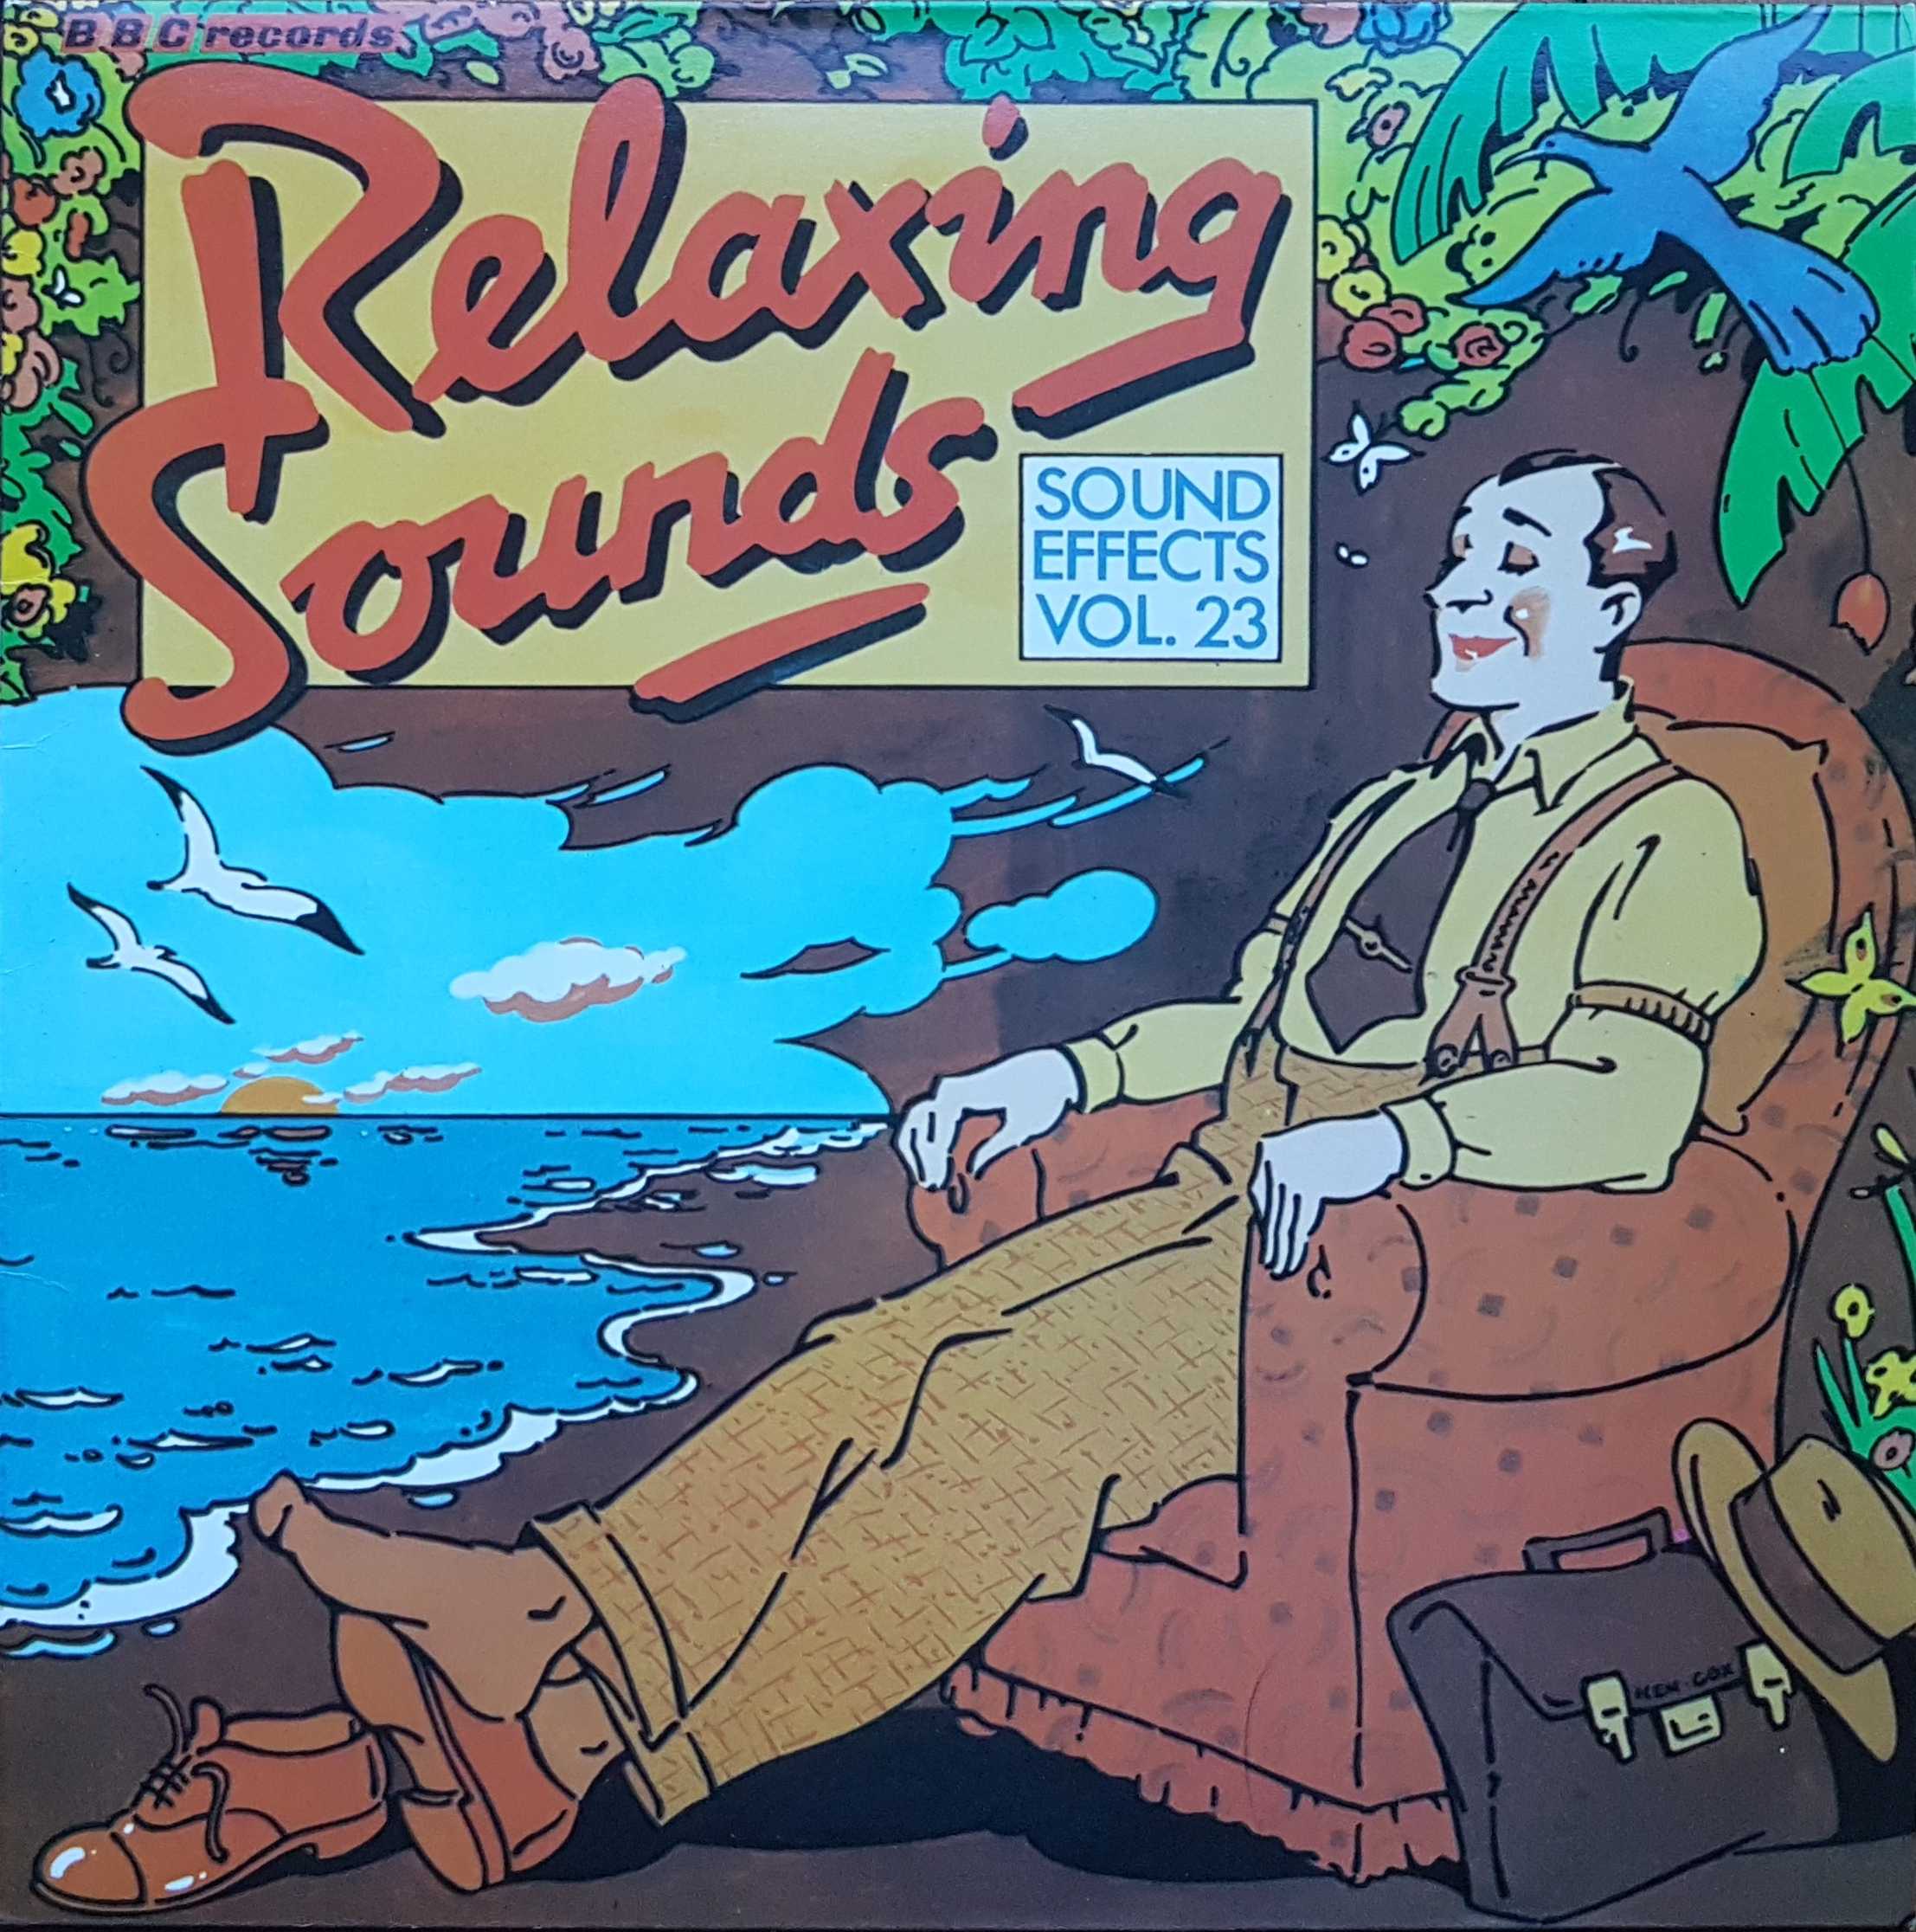 Picture of REC 360 Relaxing sounds (Sound effects no. 23) by artist Mike Harding from the BBC albums - Records and Tapes library